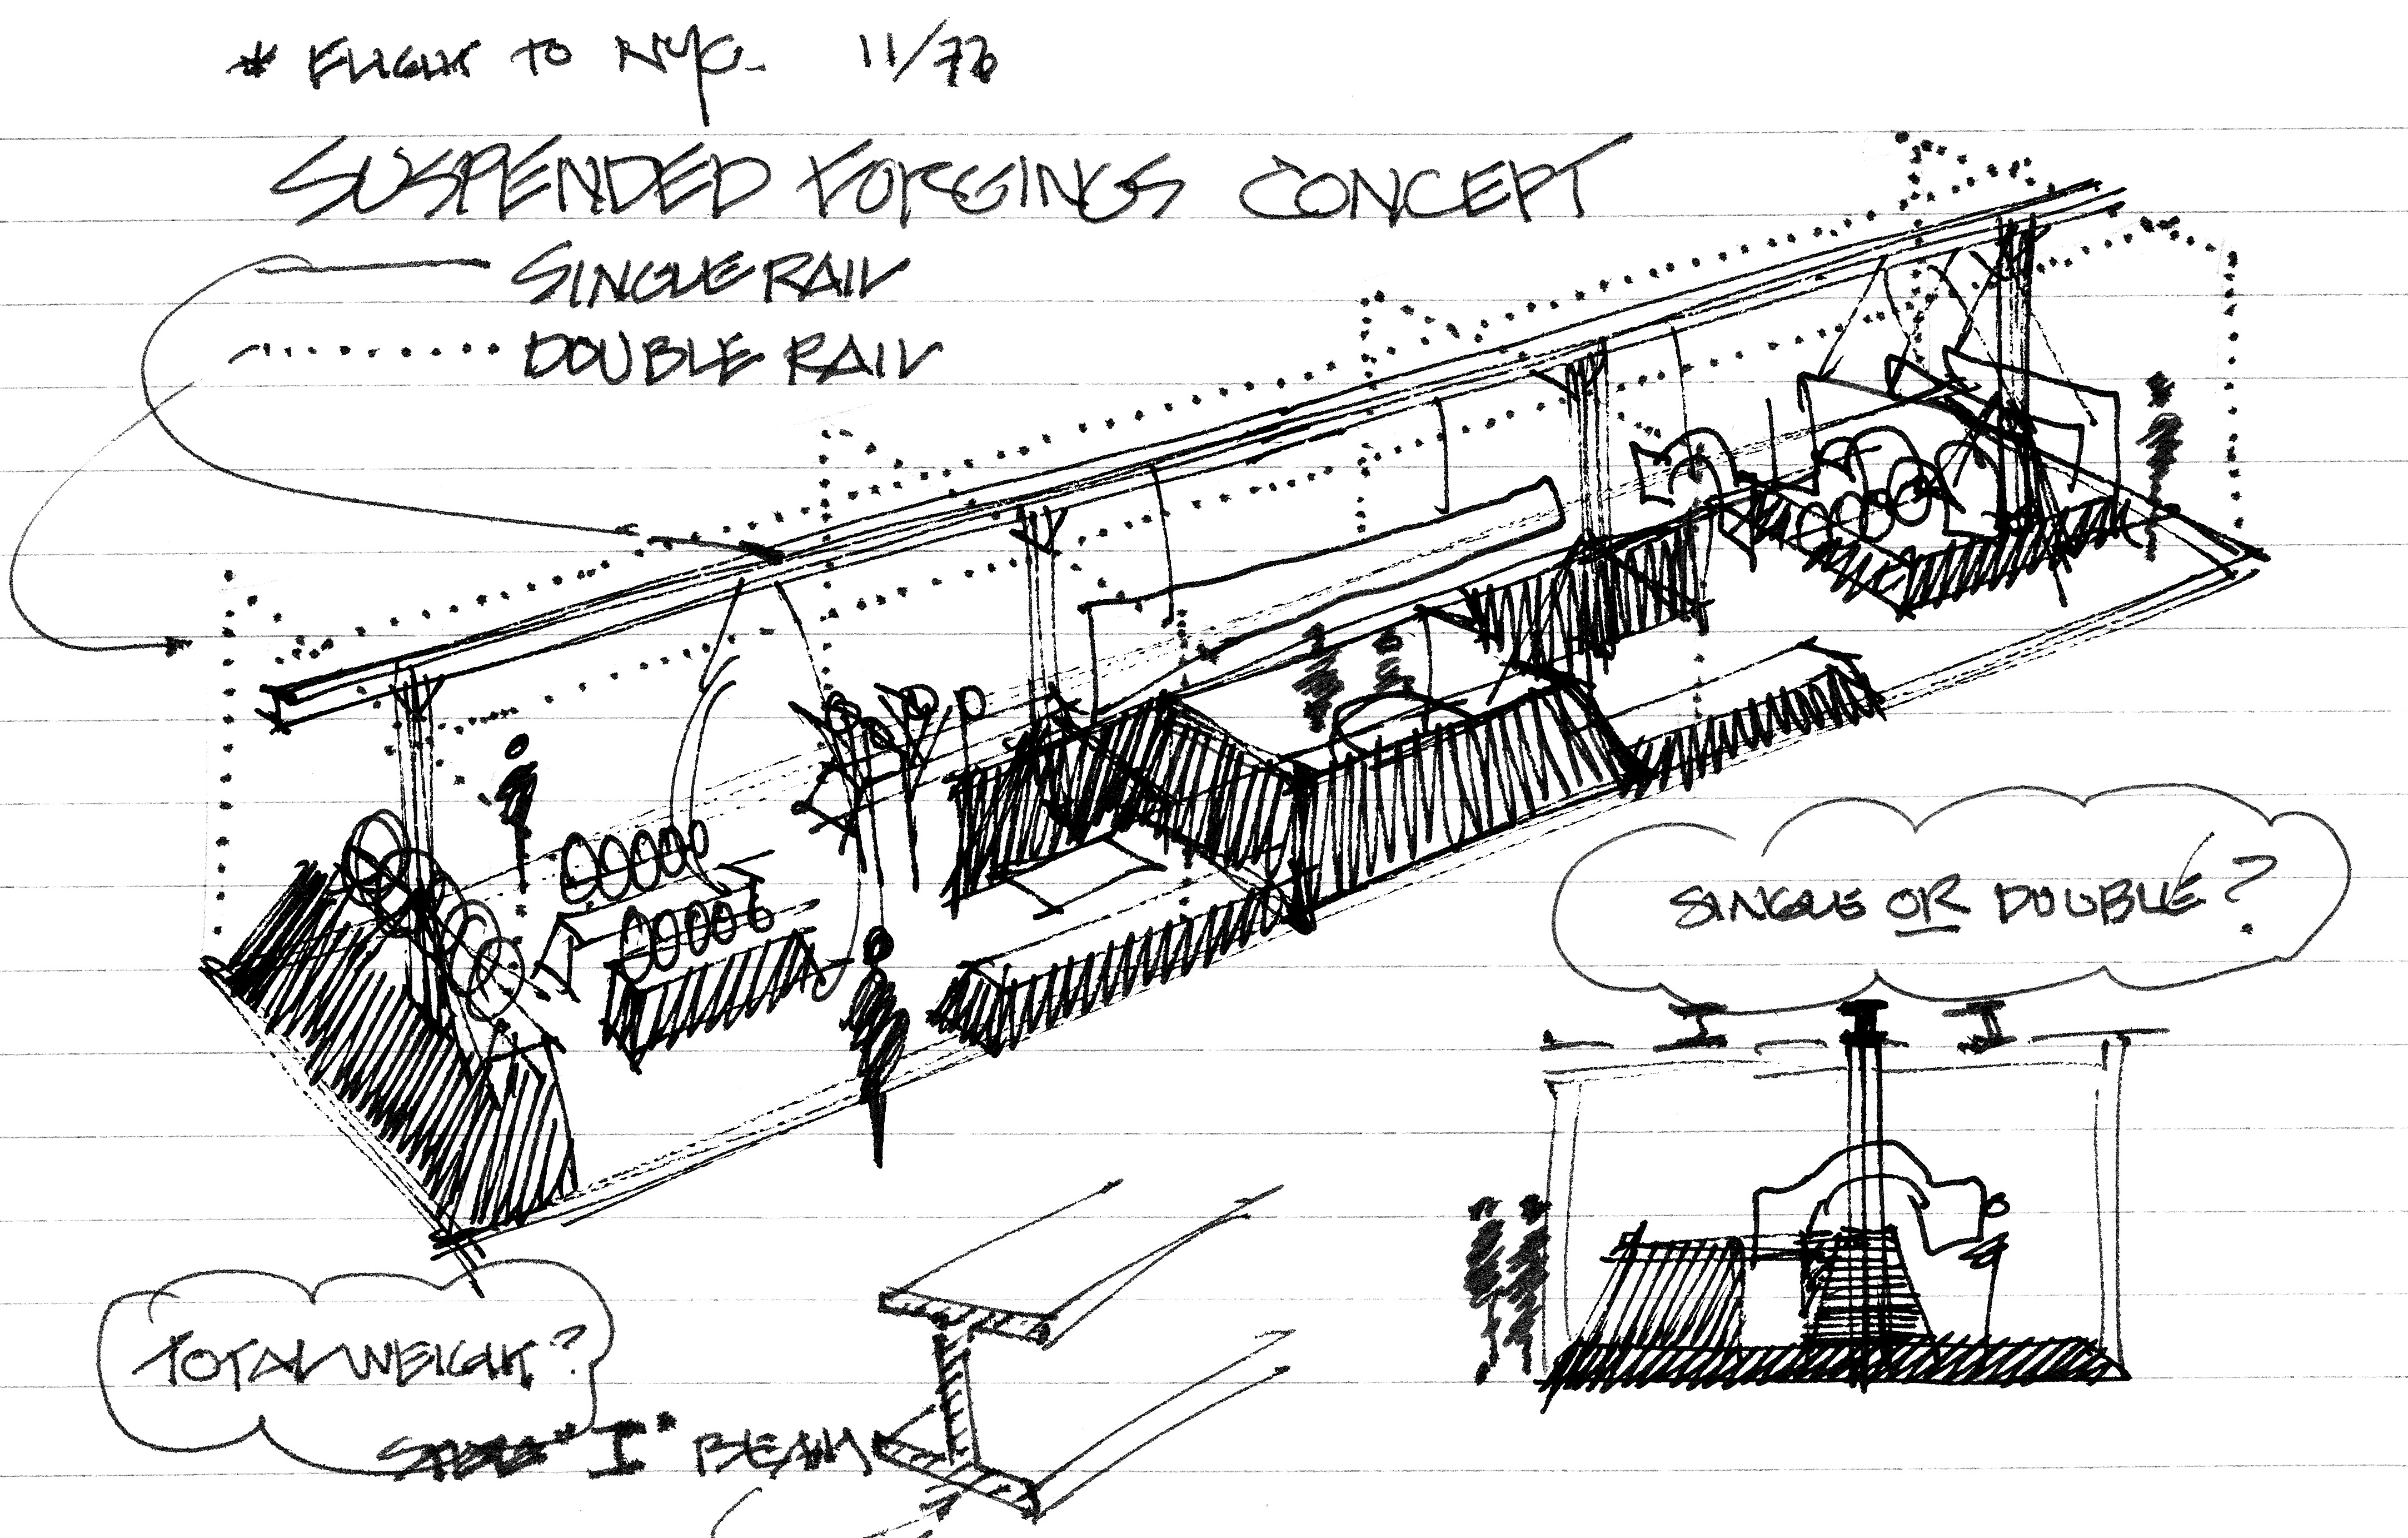 Original concept sketch of the layout of the exhibit.